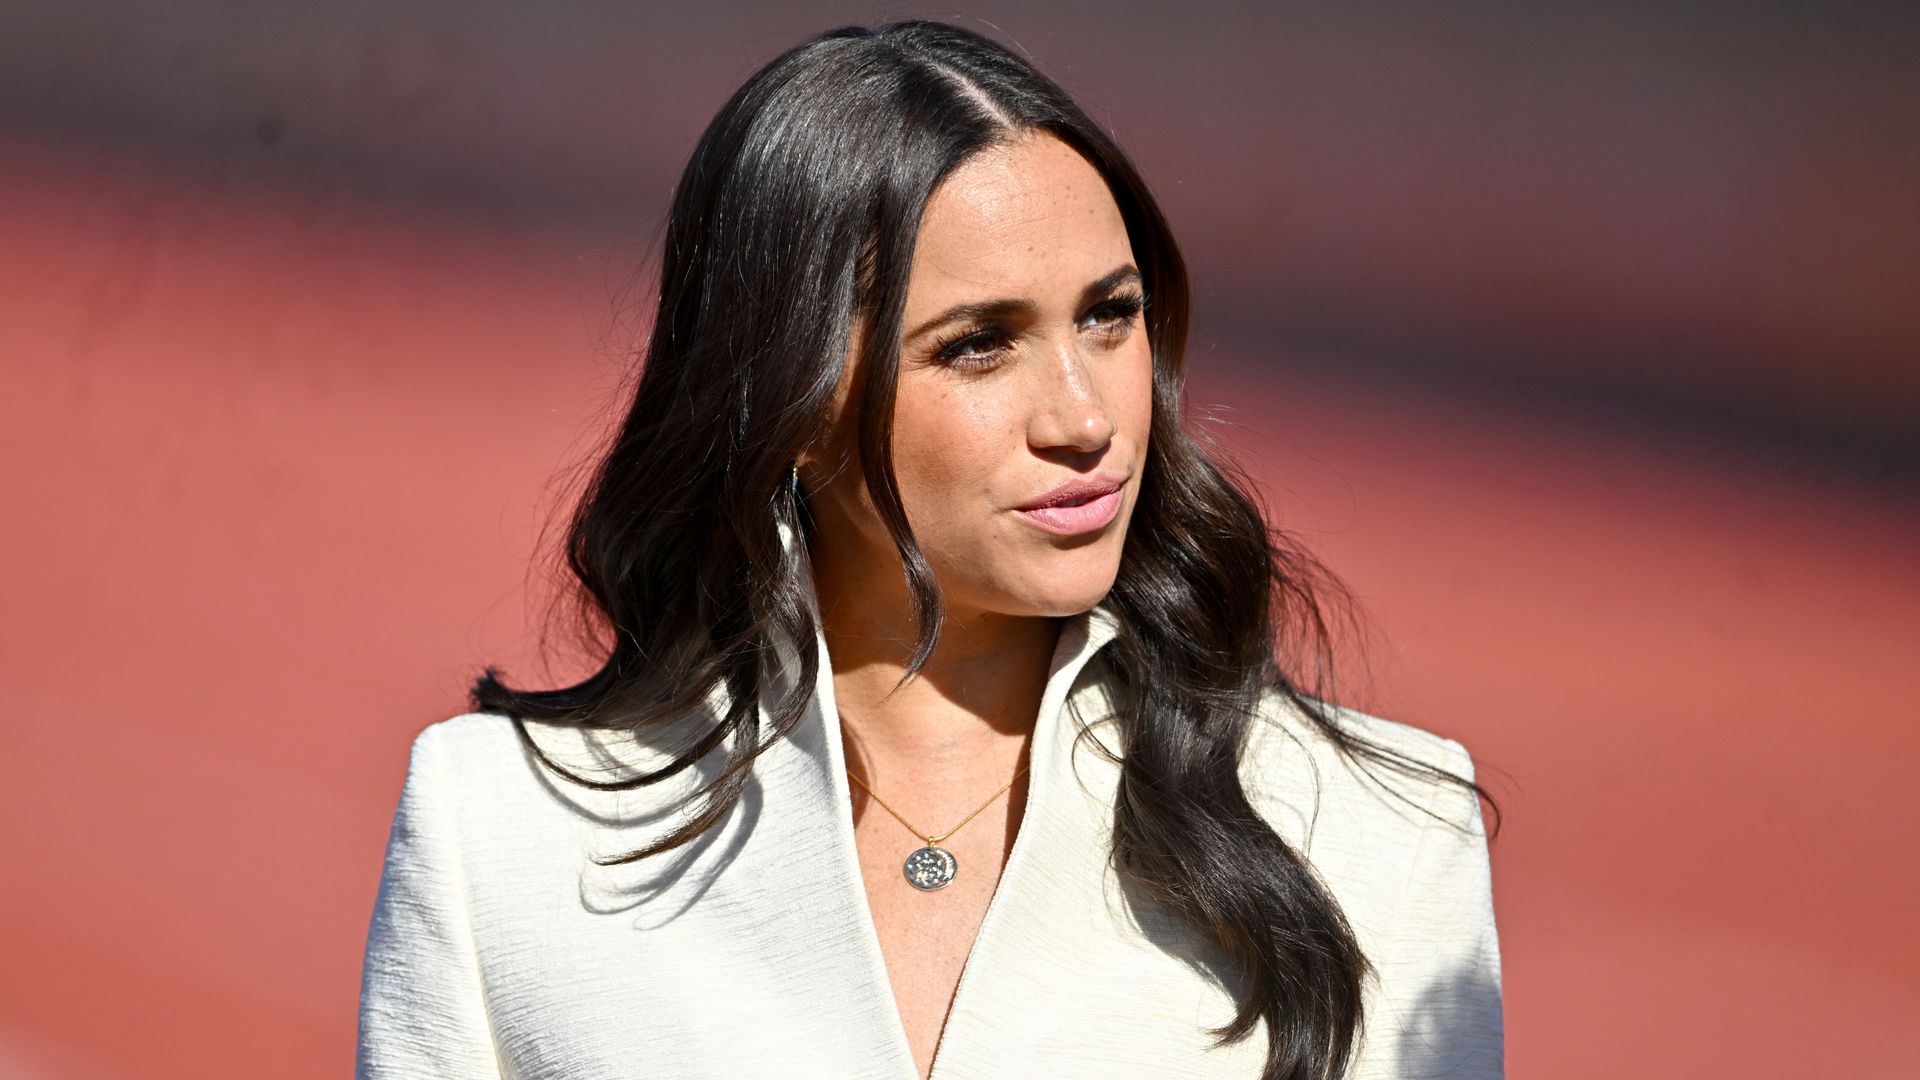 Meghan Markle has a new stylist: Here's what we know so far about her new style era